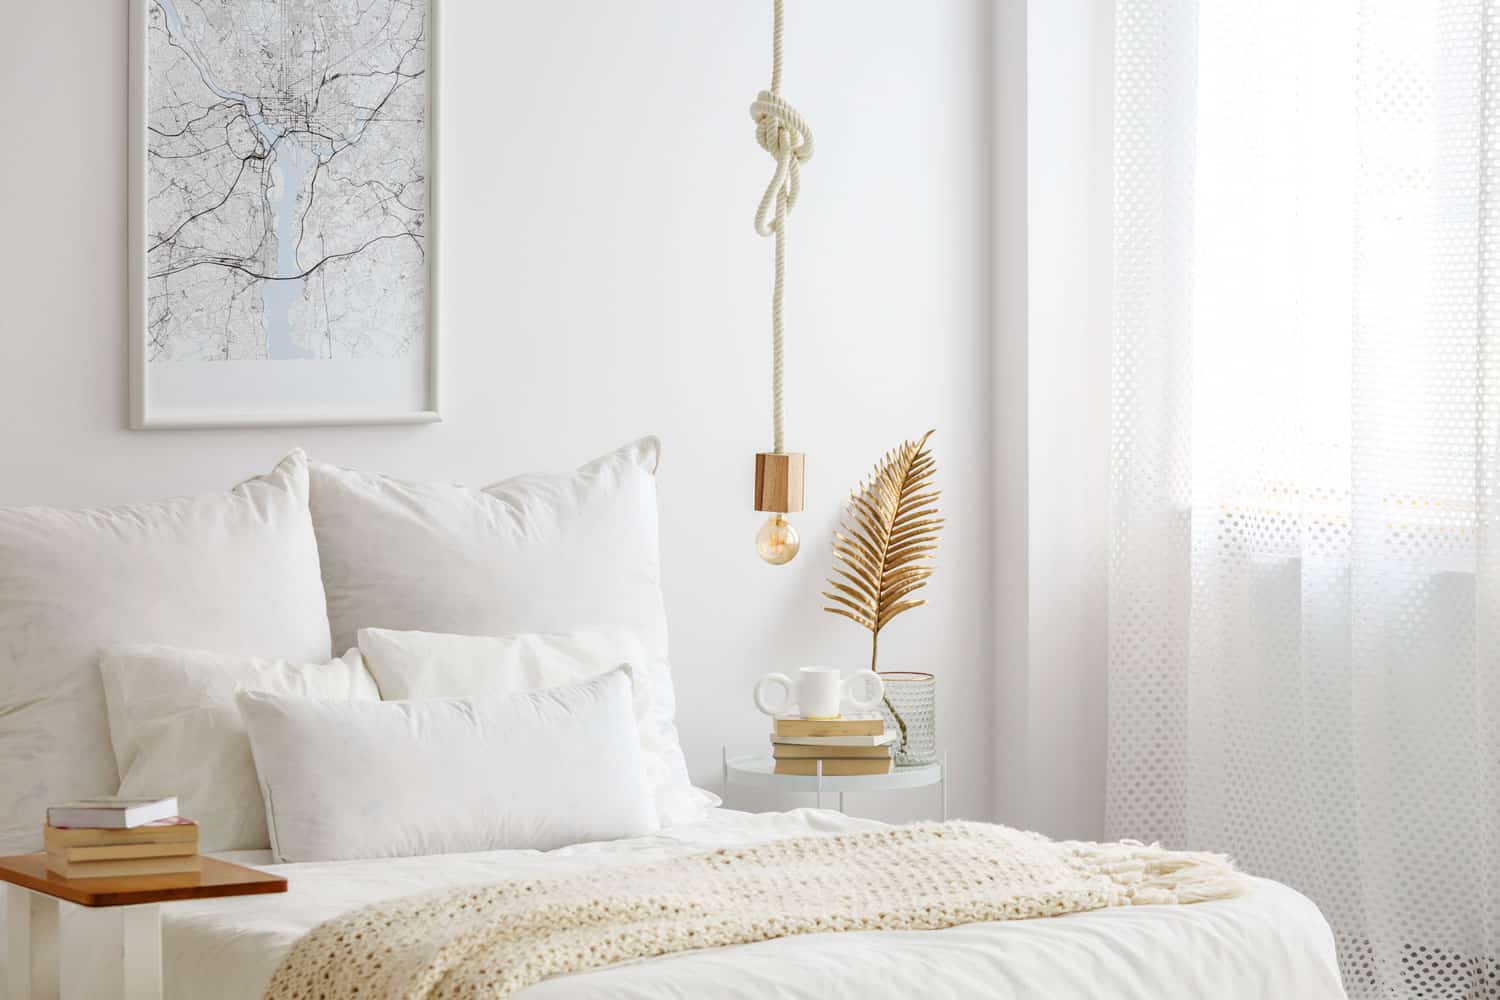 Simple bulb lamp on a rope hanging above bed with white bedclothes, books and gold fern leaf on an end table in white bedroom interior, What Curtains Go With White Walls?